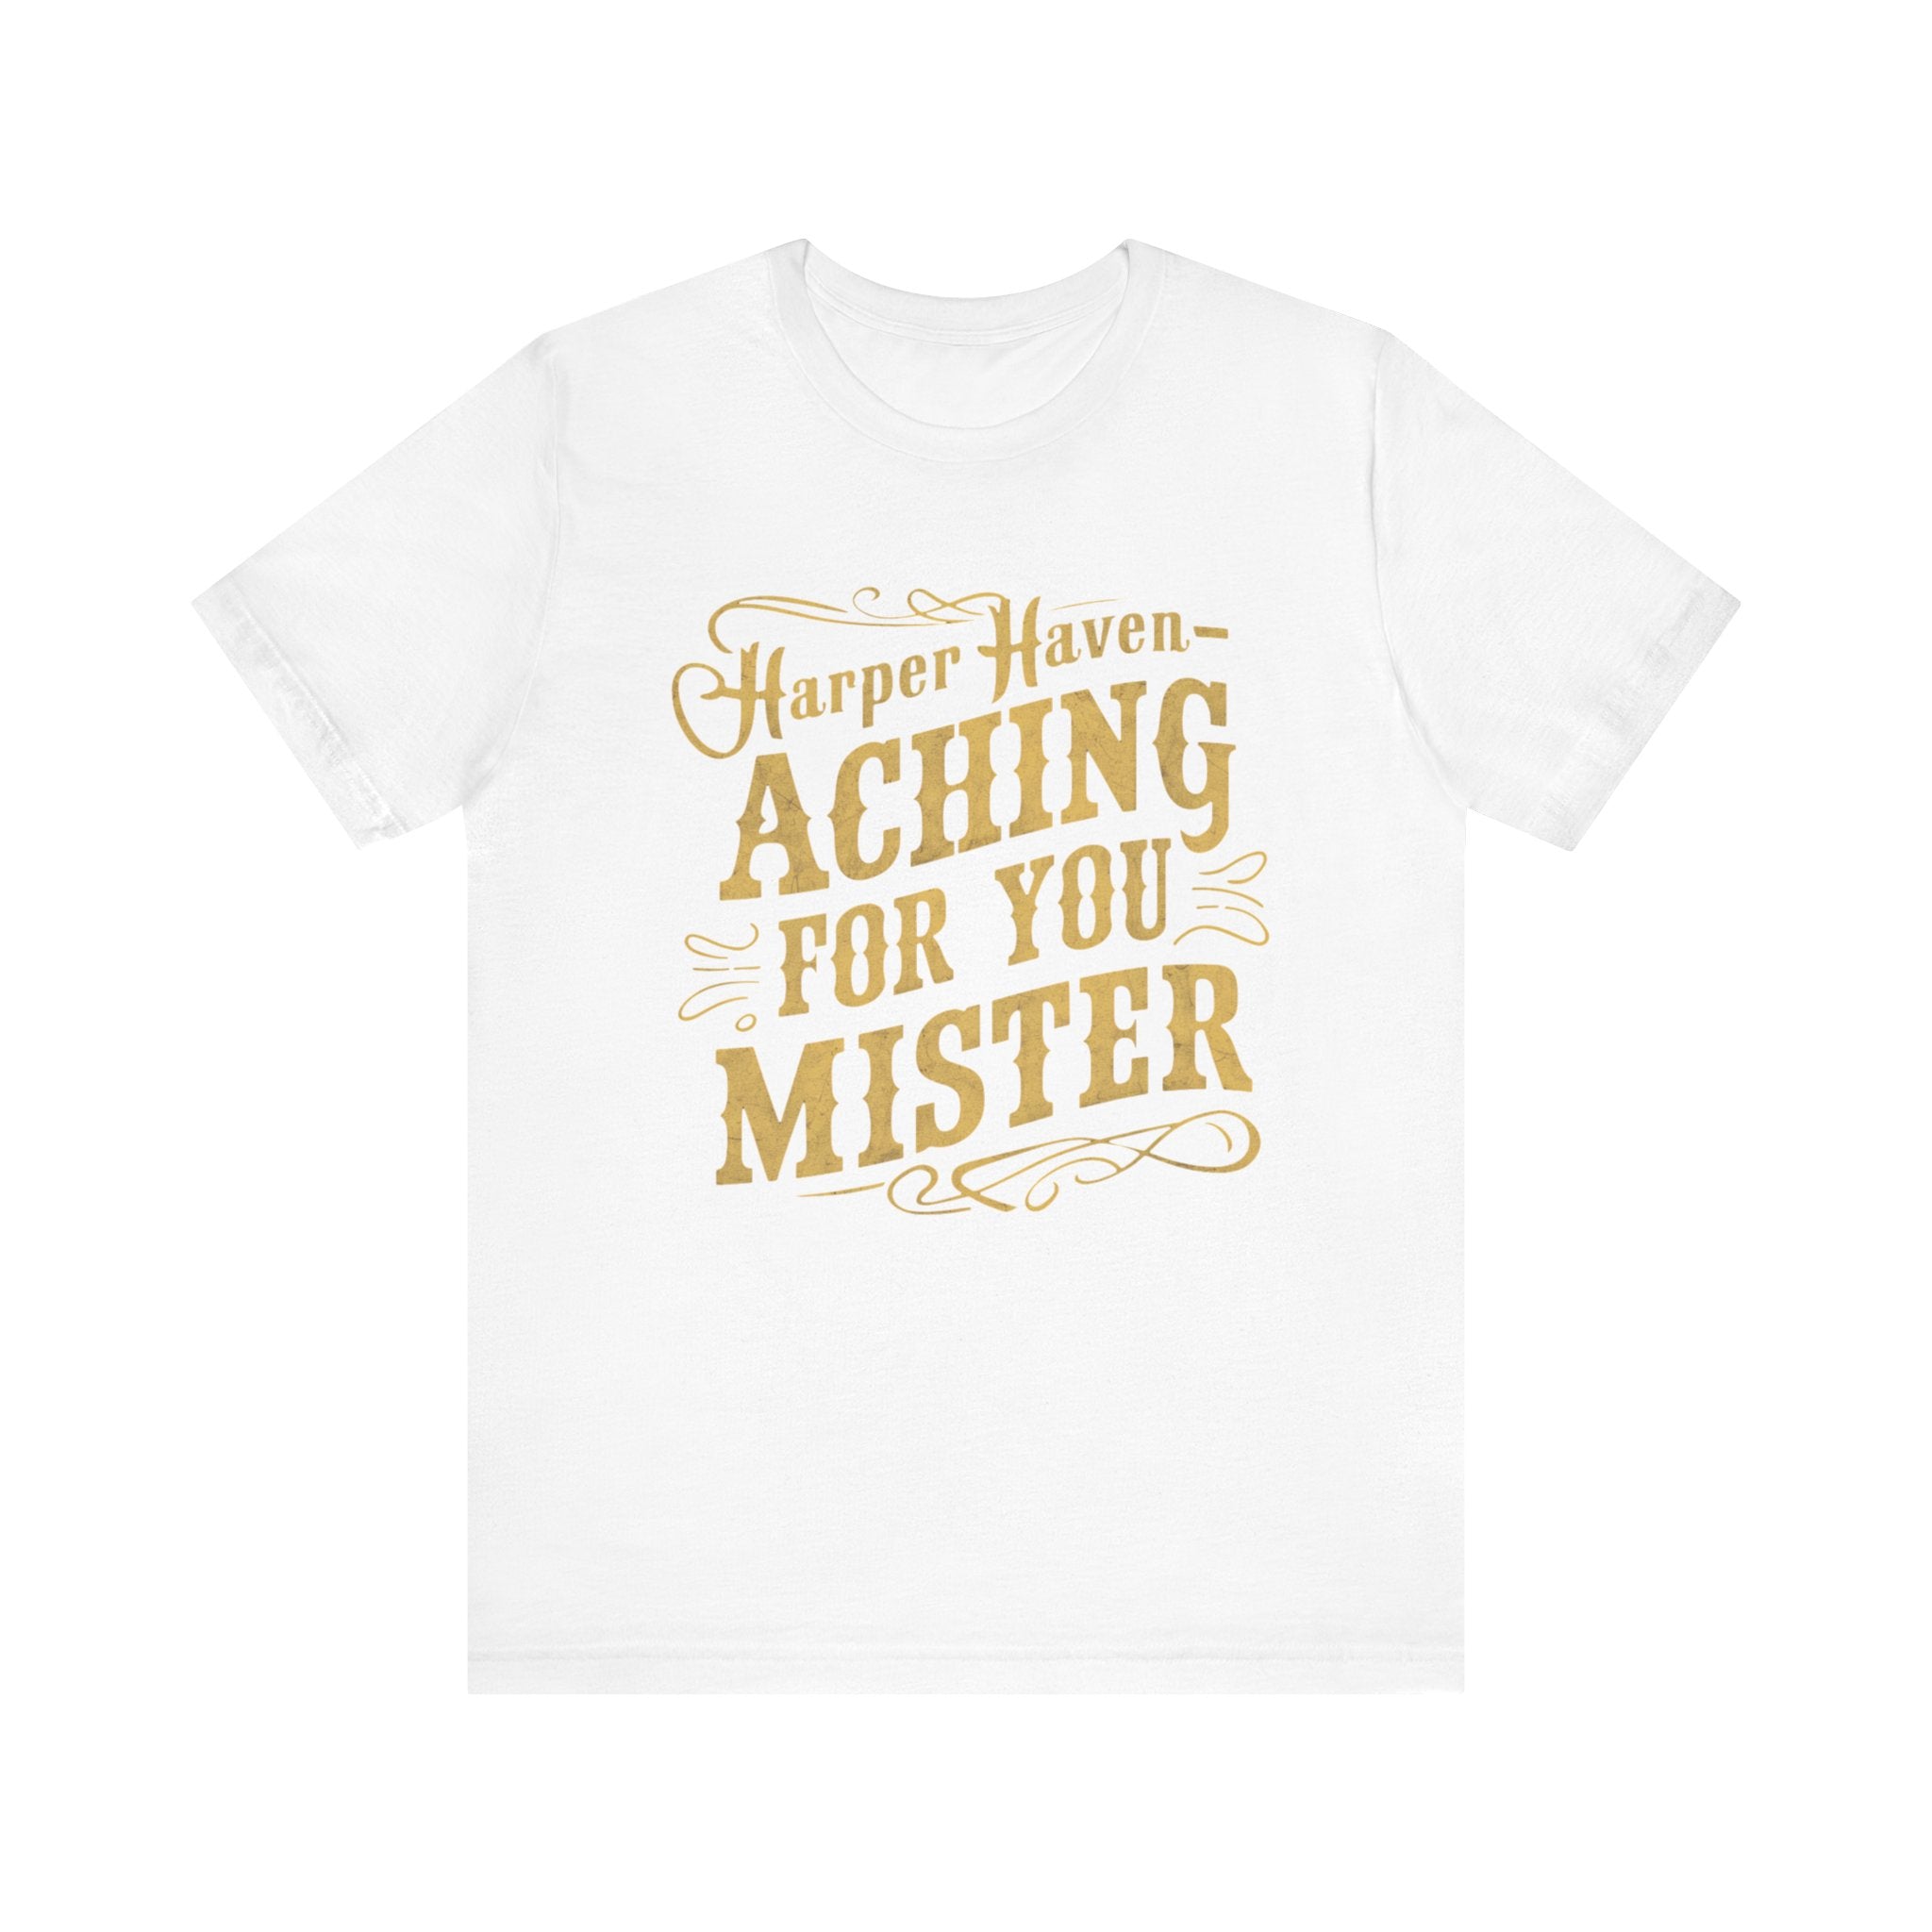 Harper Haven Aching For You Mister Shirt